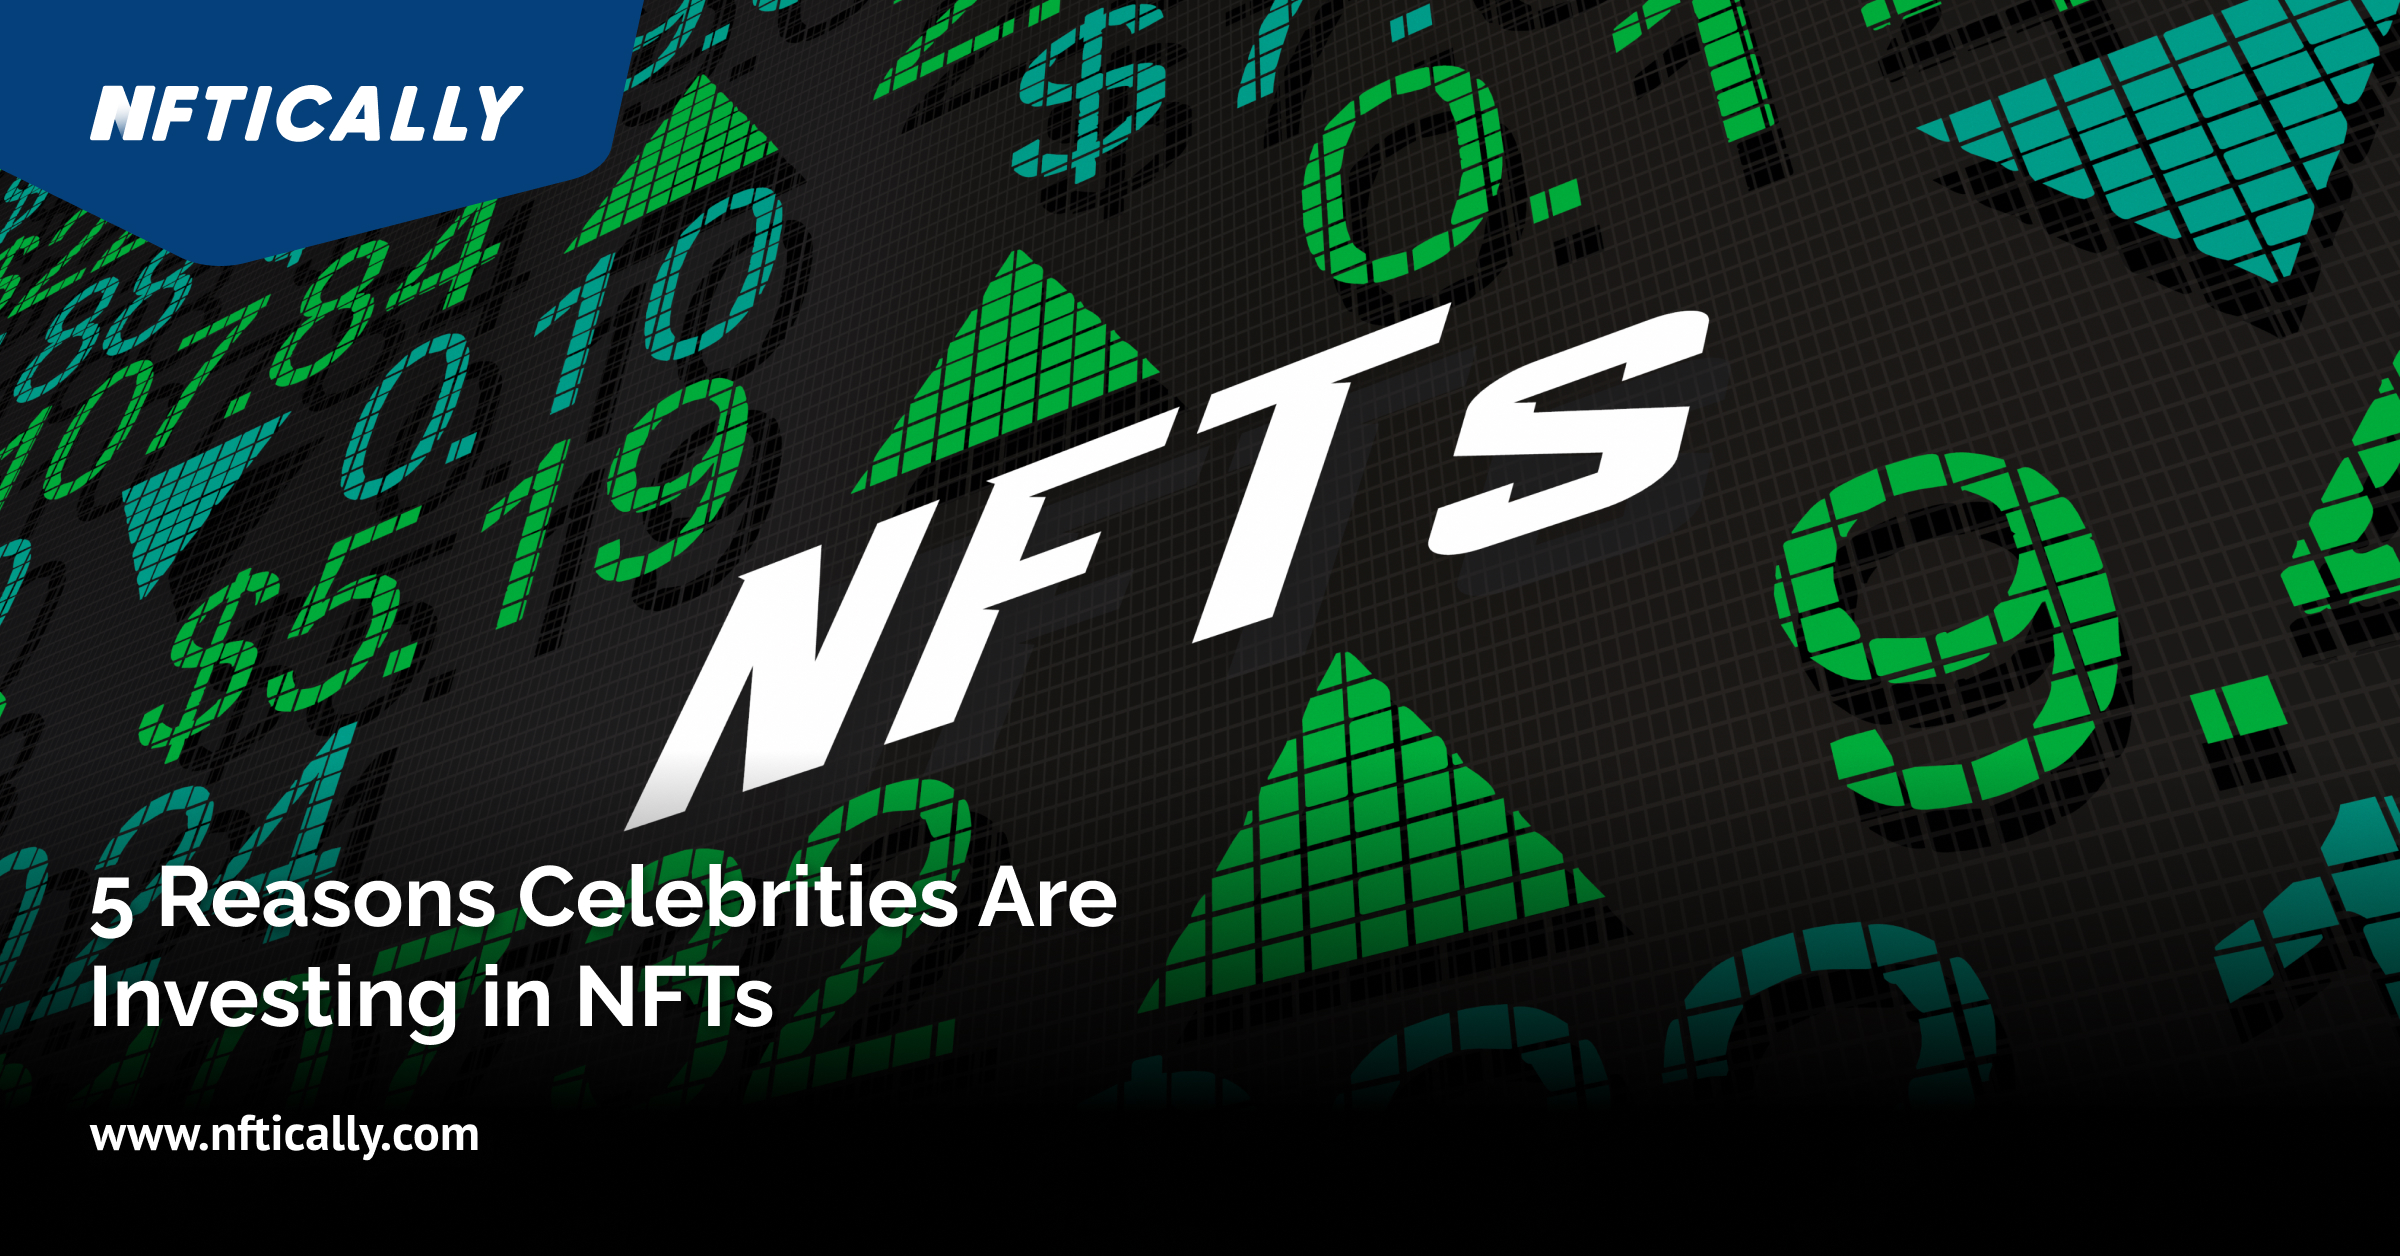 5 Reasons Celebrities Are Investing in NFTs